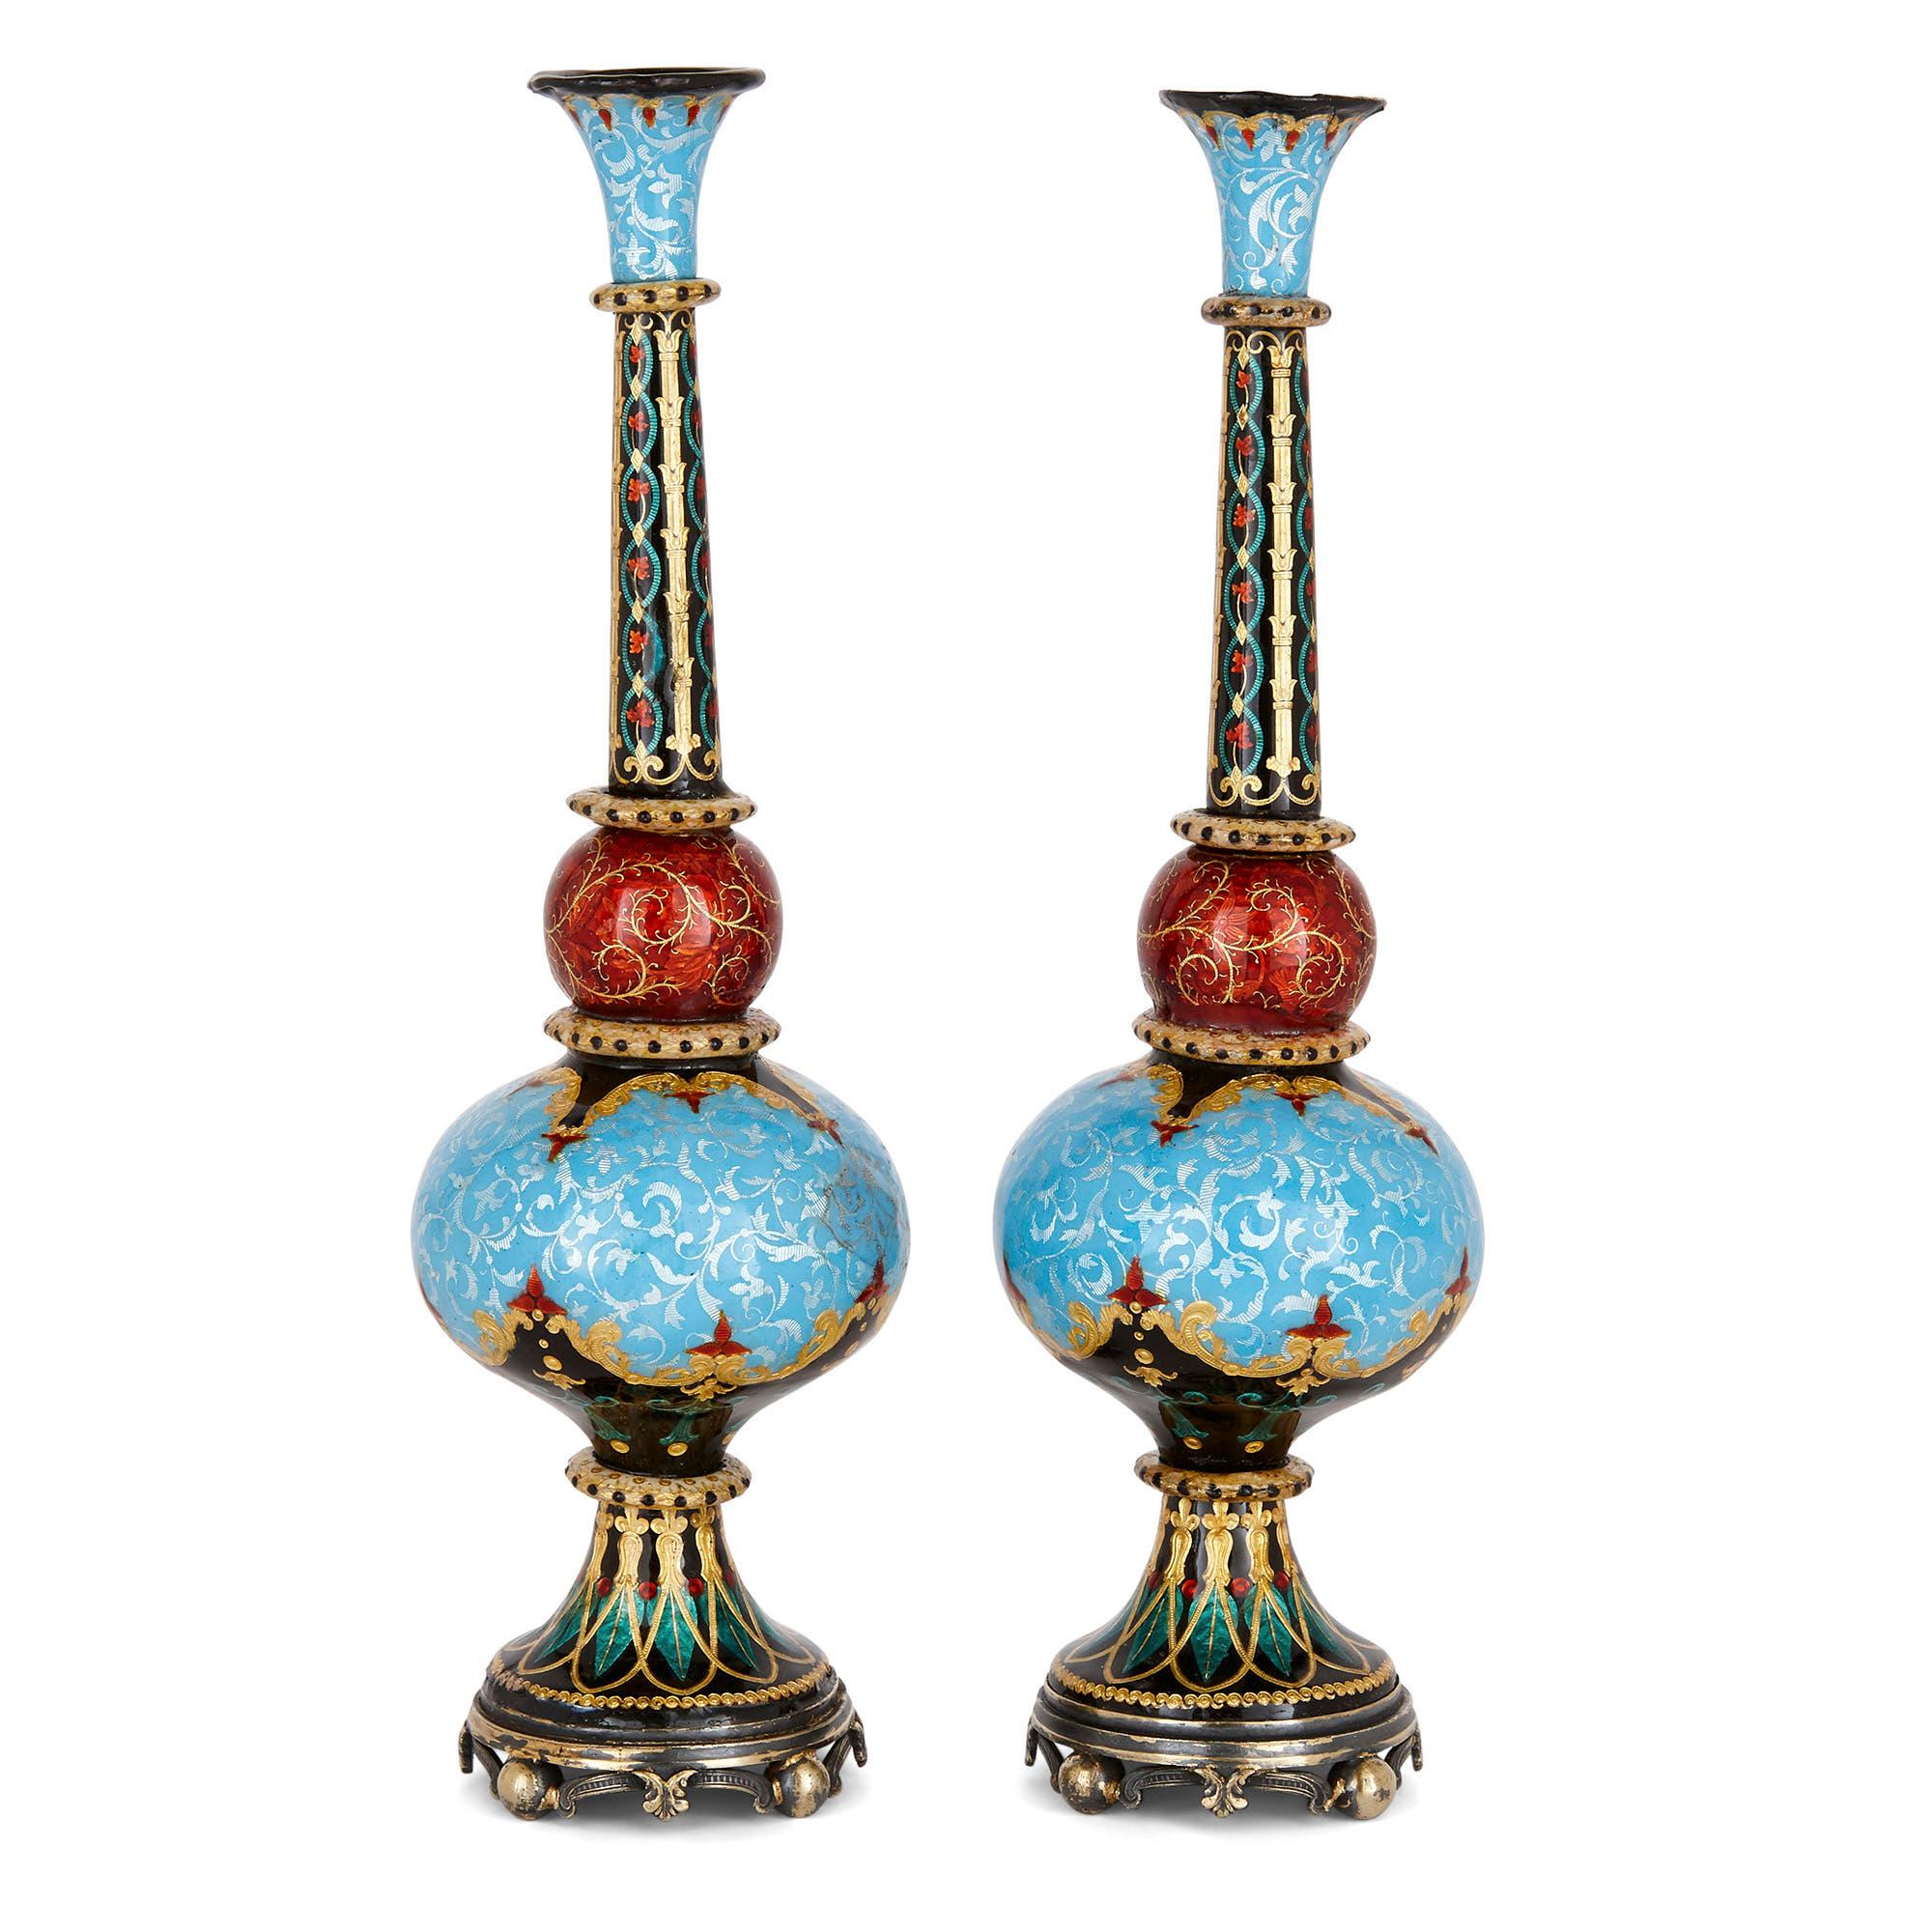 Pair of antique French arabesque enamel vases for Turkish Export
French, late 19th century
Dimensions: Height 20cm, diameter 6cm

These two unusual vases are beautifully crafted from polychrome enamelled bodies, with parcel gilt and arabesque